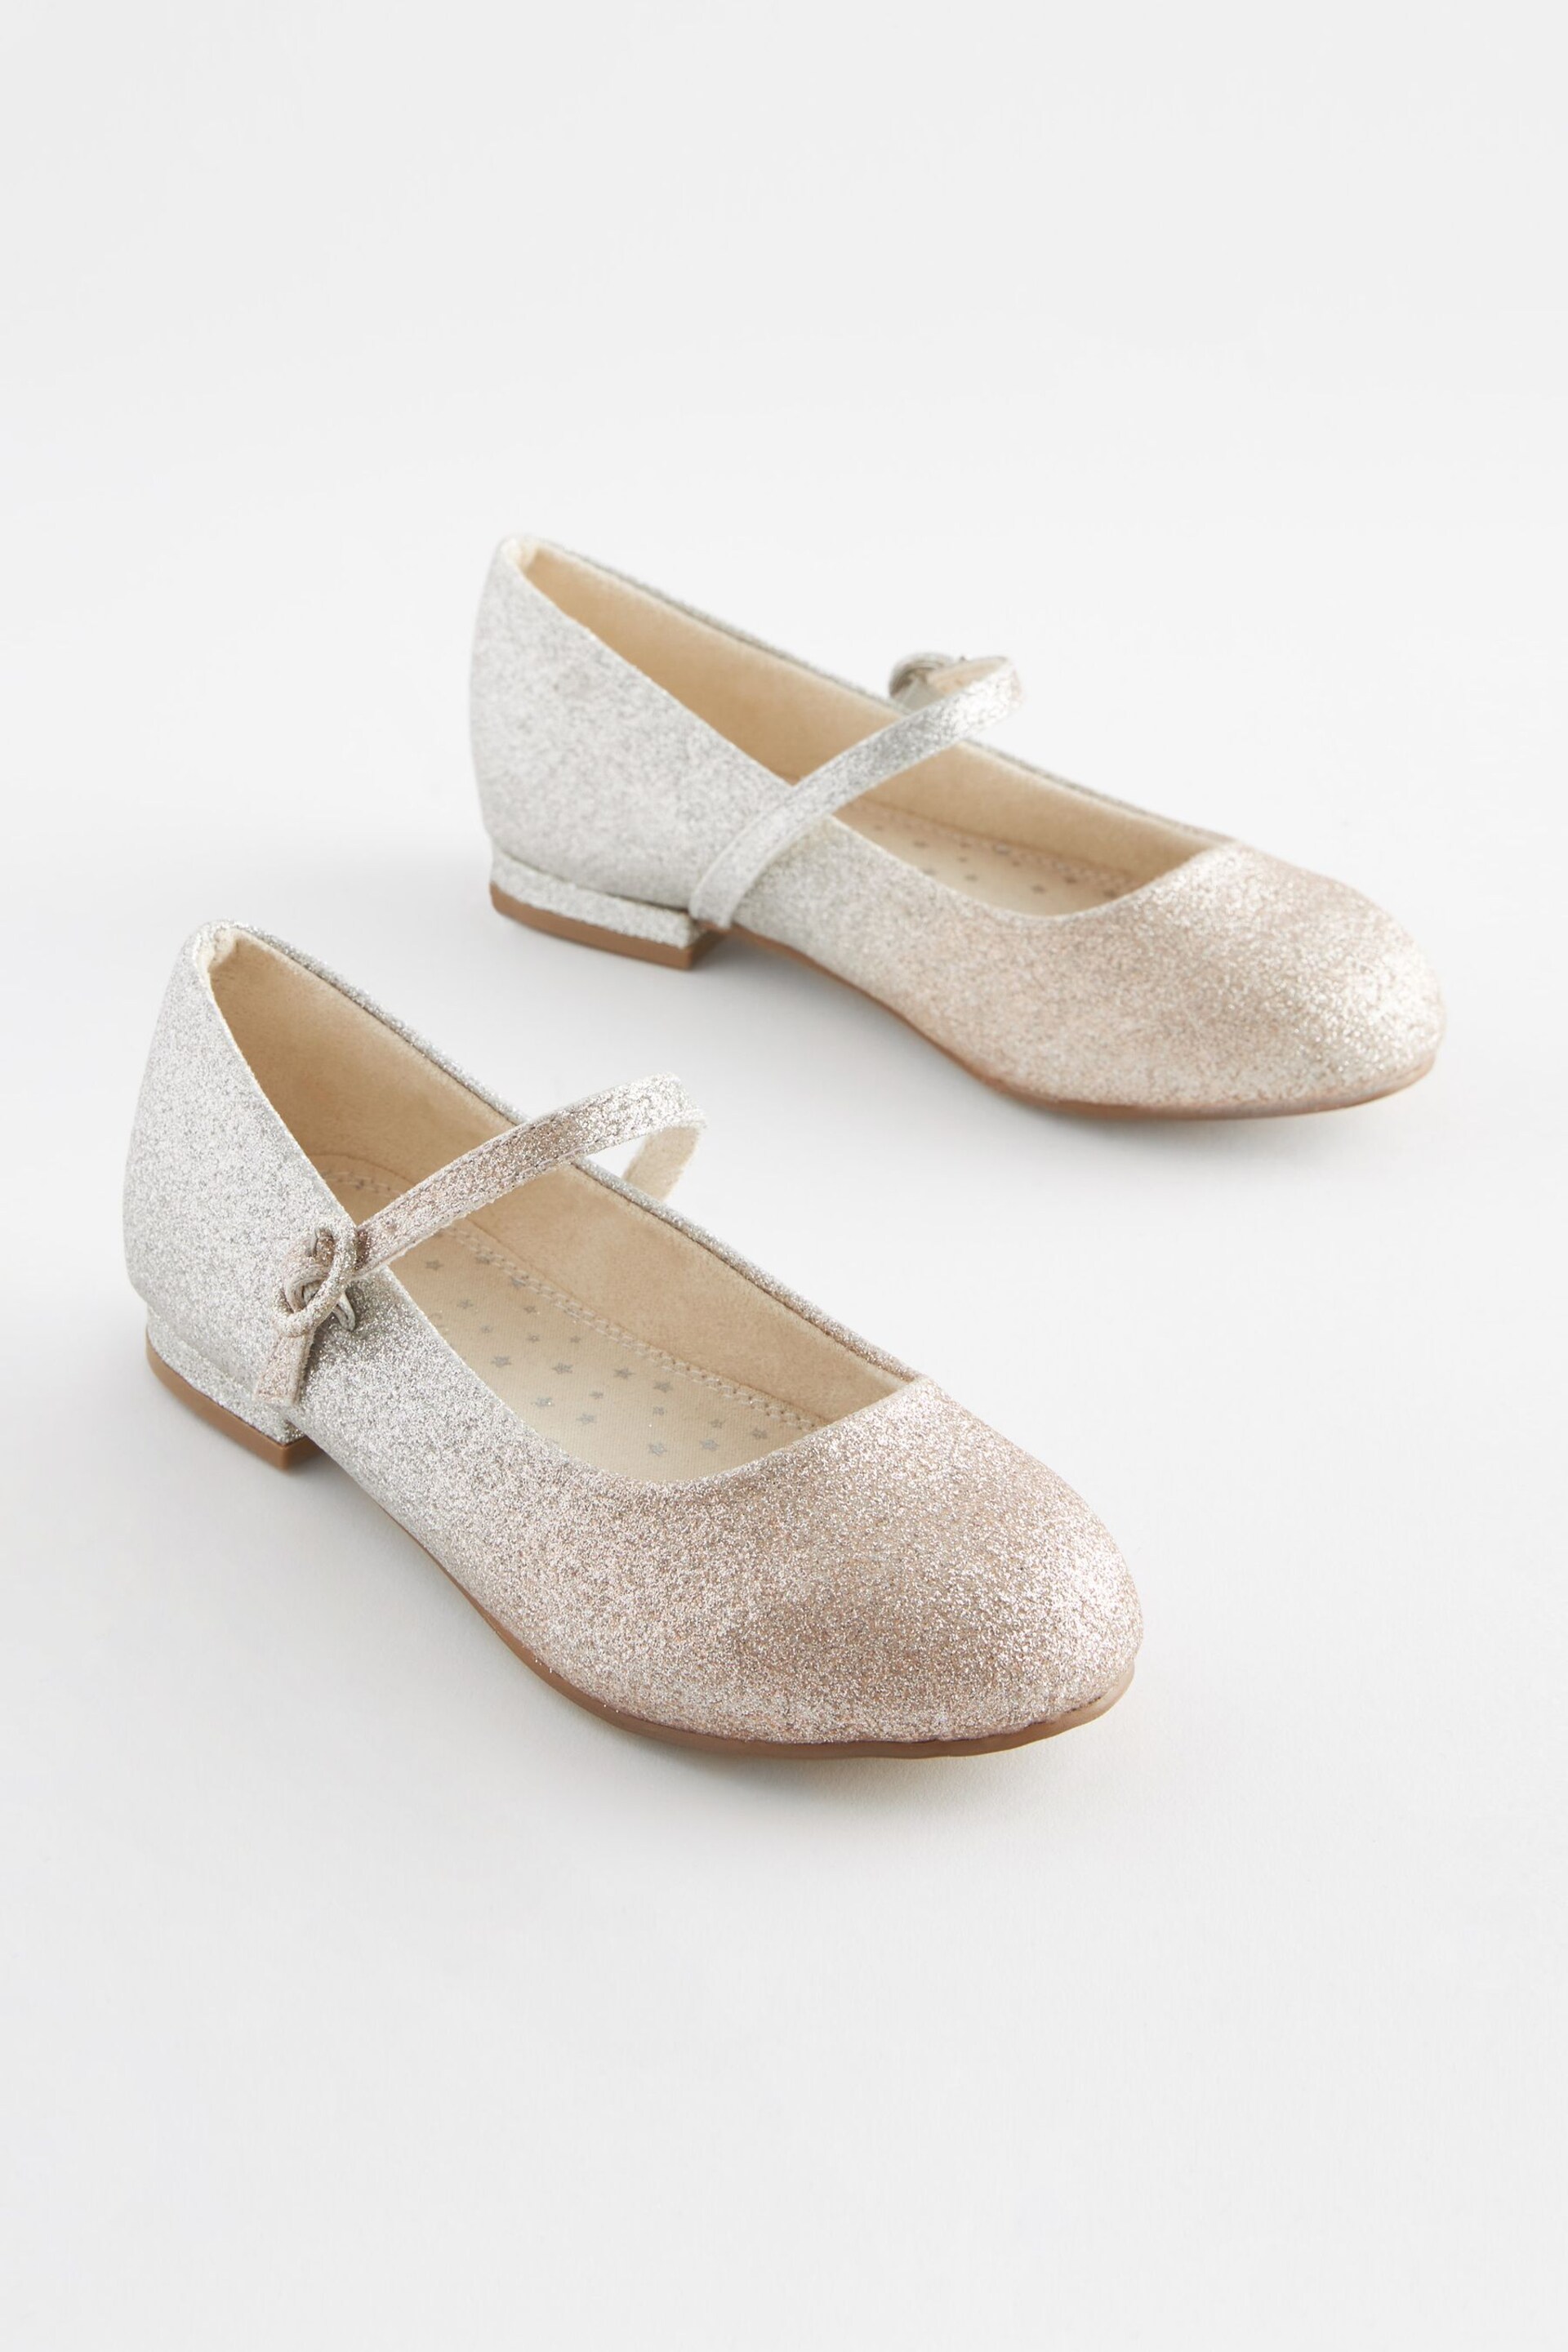 Ombre Gold/Silver Glitter Wide Fit (G) Mary Jane Occasion Shoes - Image 1 of 6